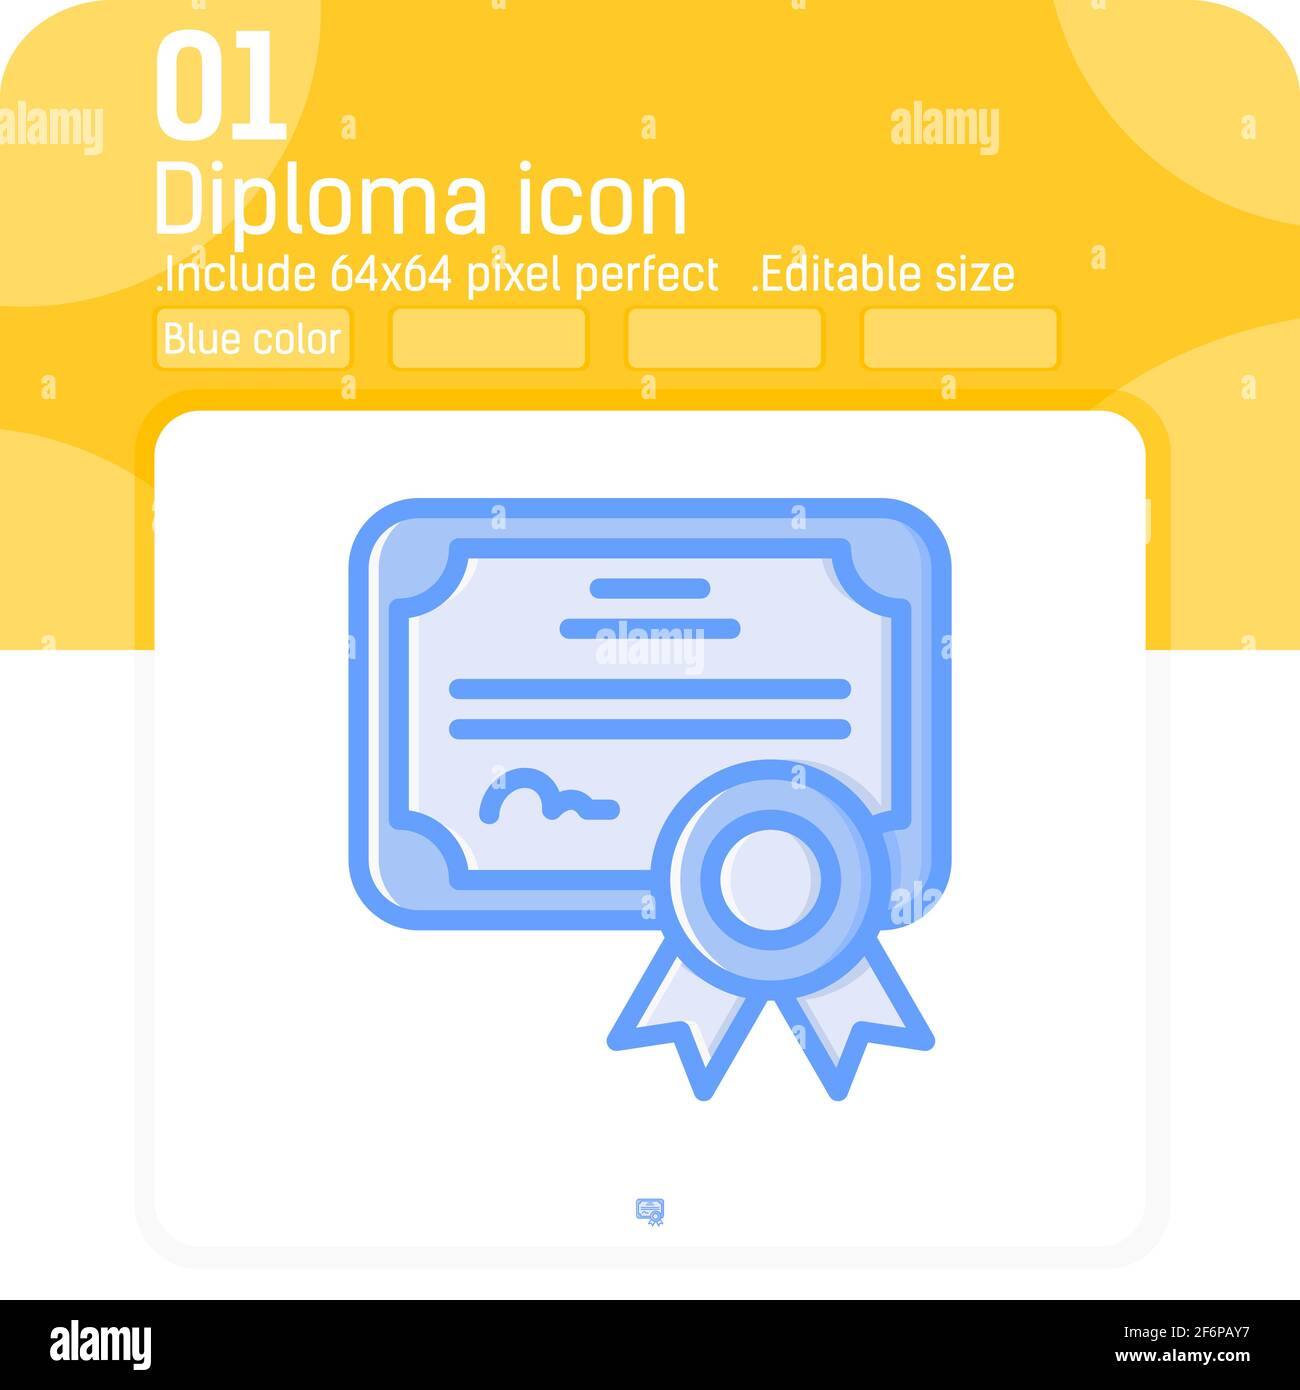 Diploma vector icon with high quality blue outline style isolated on white background. Illustration certificate sign symbol icon for web, ui, ux, web Stock Vector